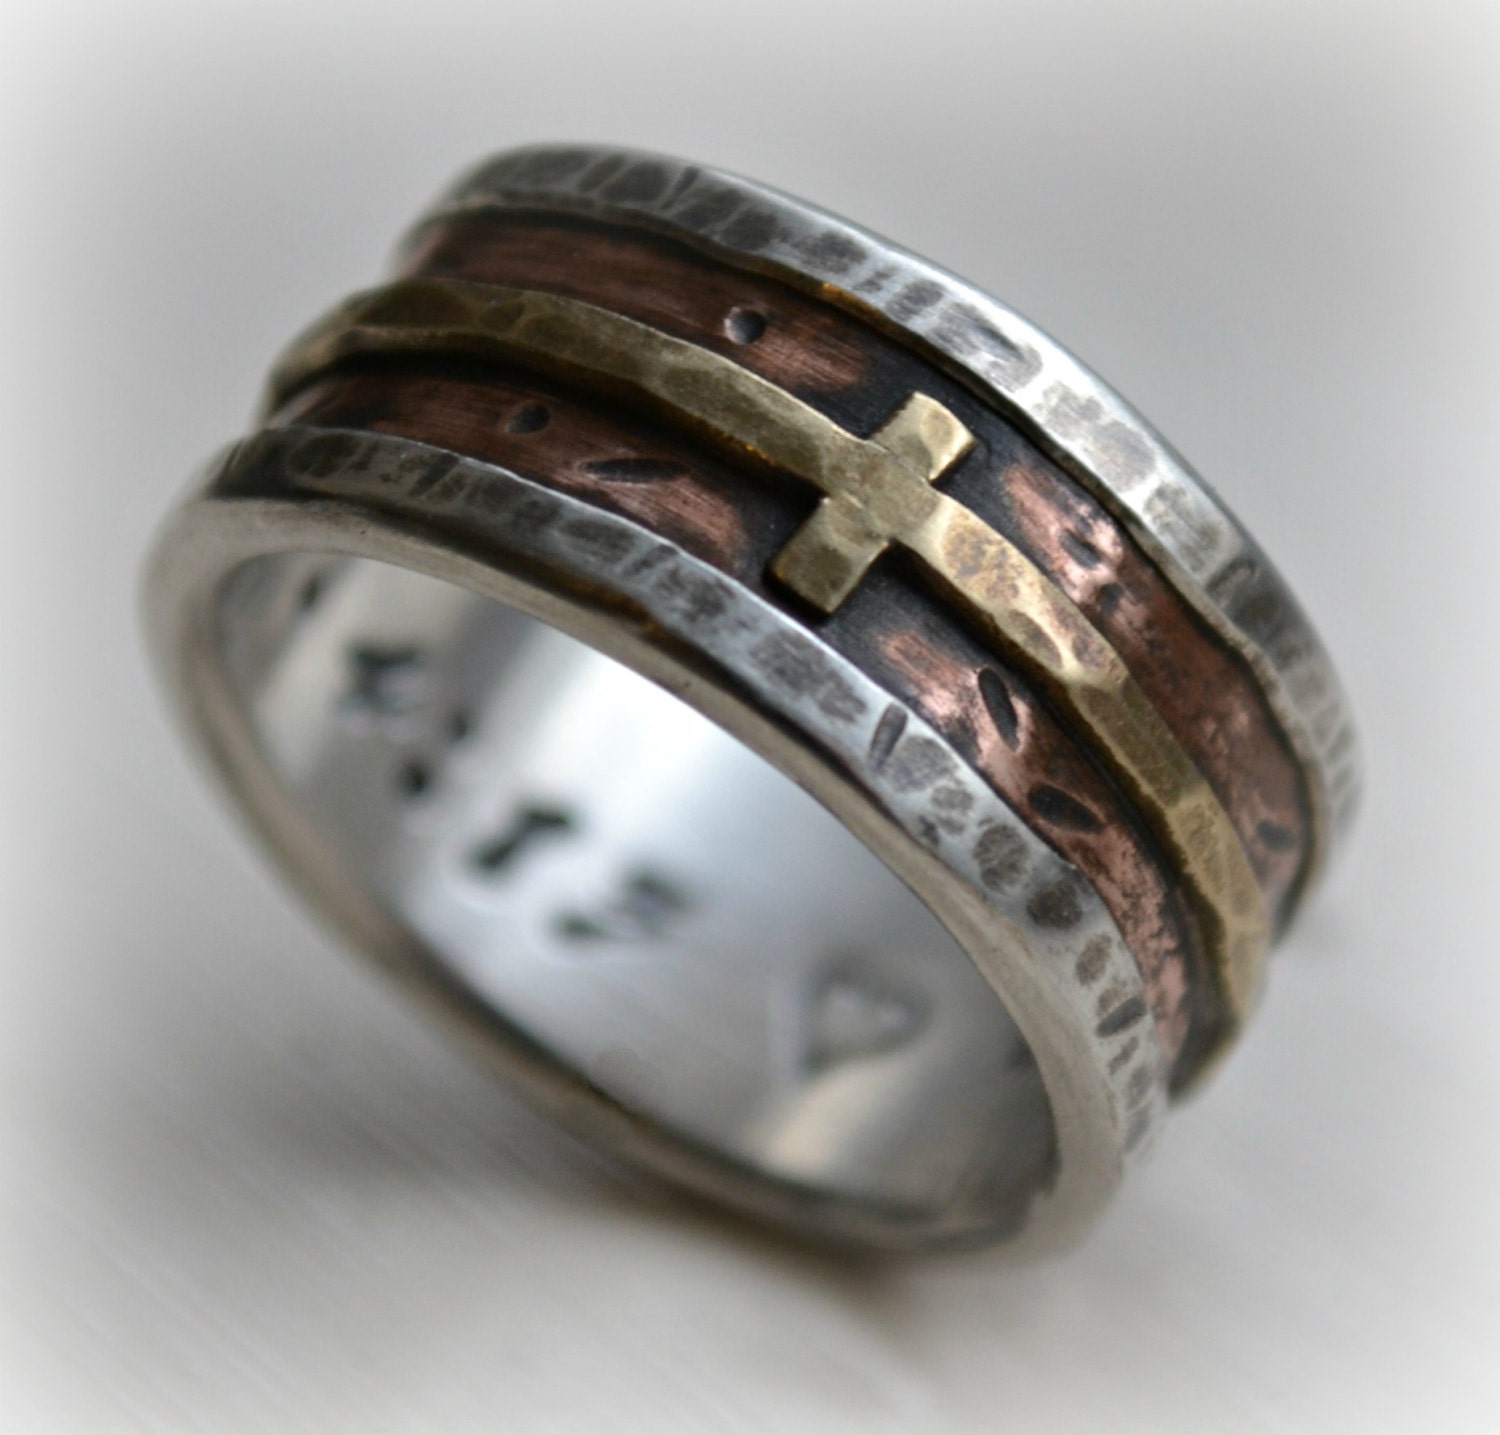 Christian Ring - Cross of Charlemagne, Hand engraved - Silver and Gold |  MasonArtStore